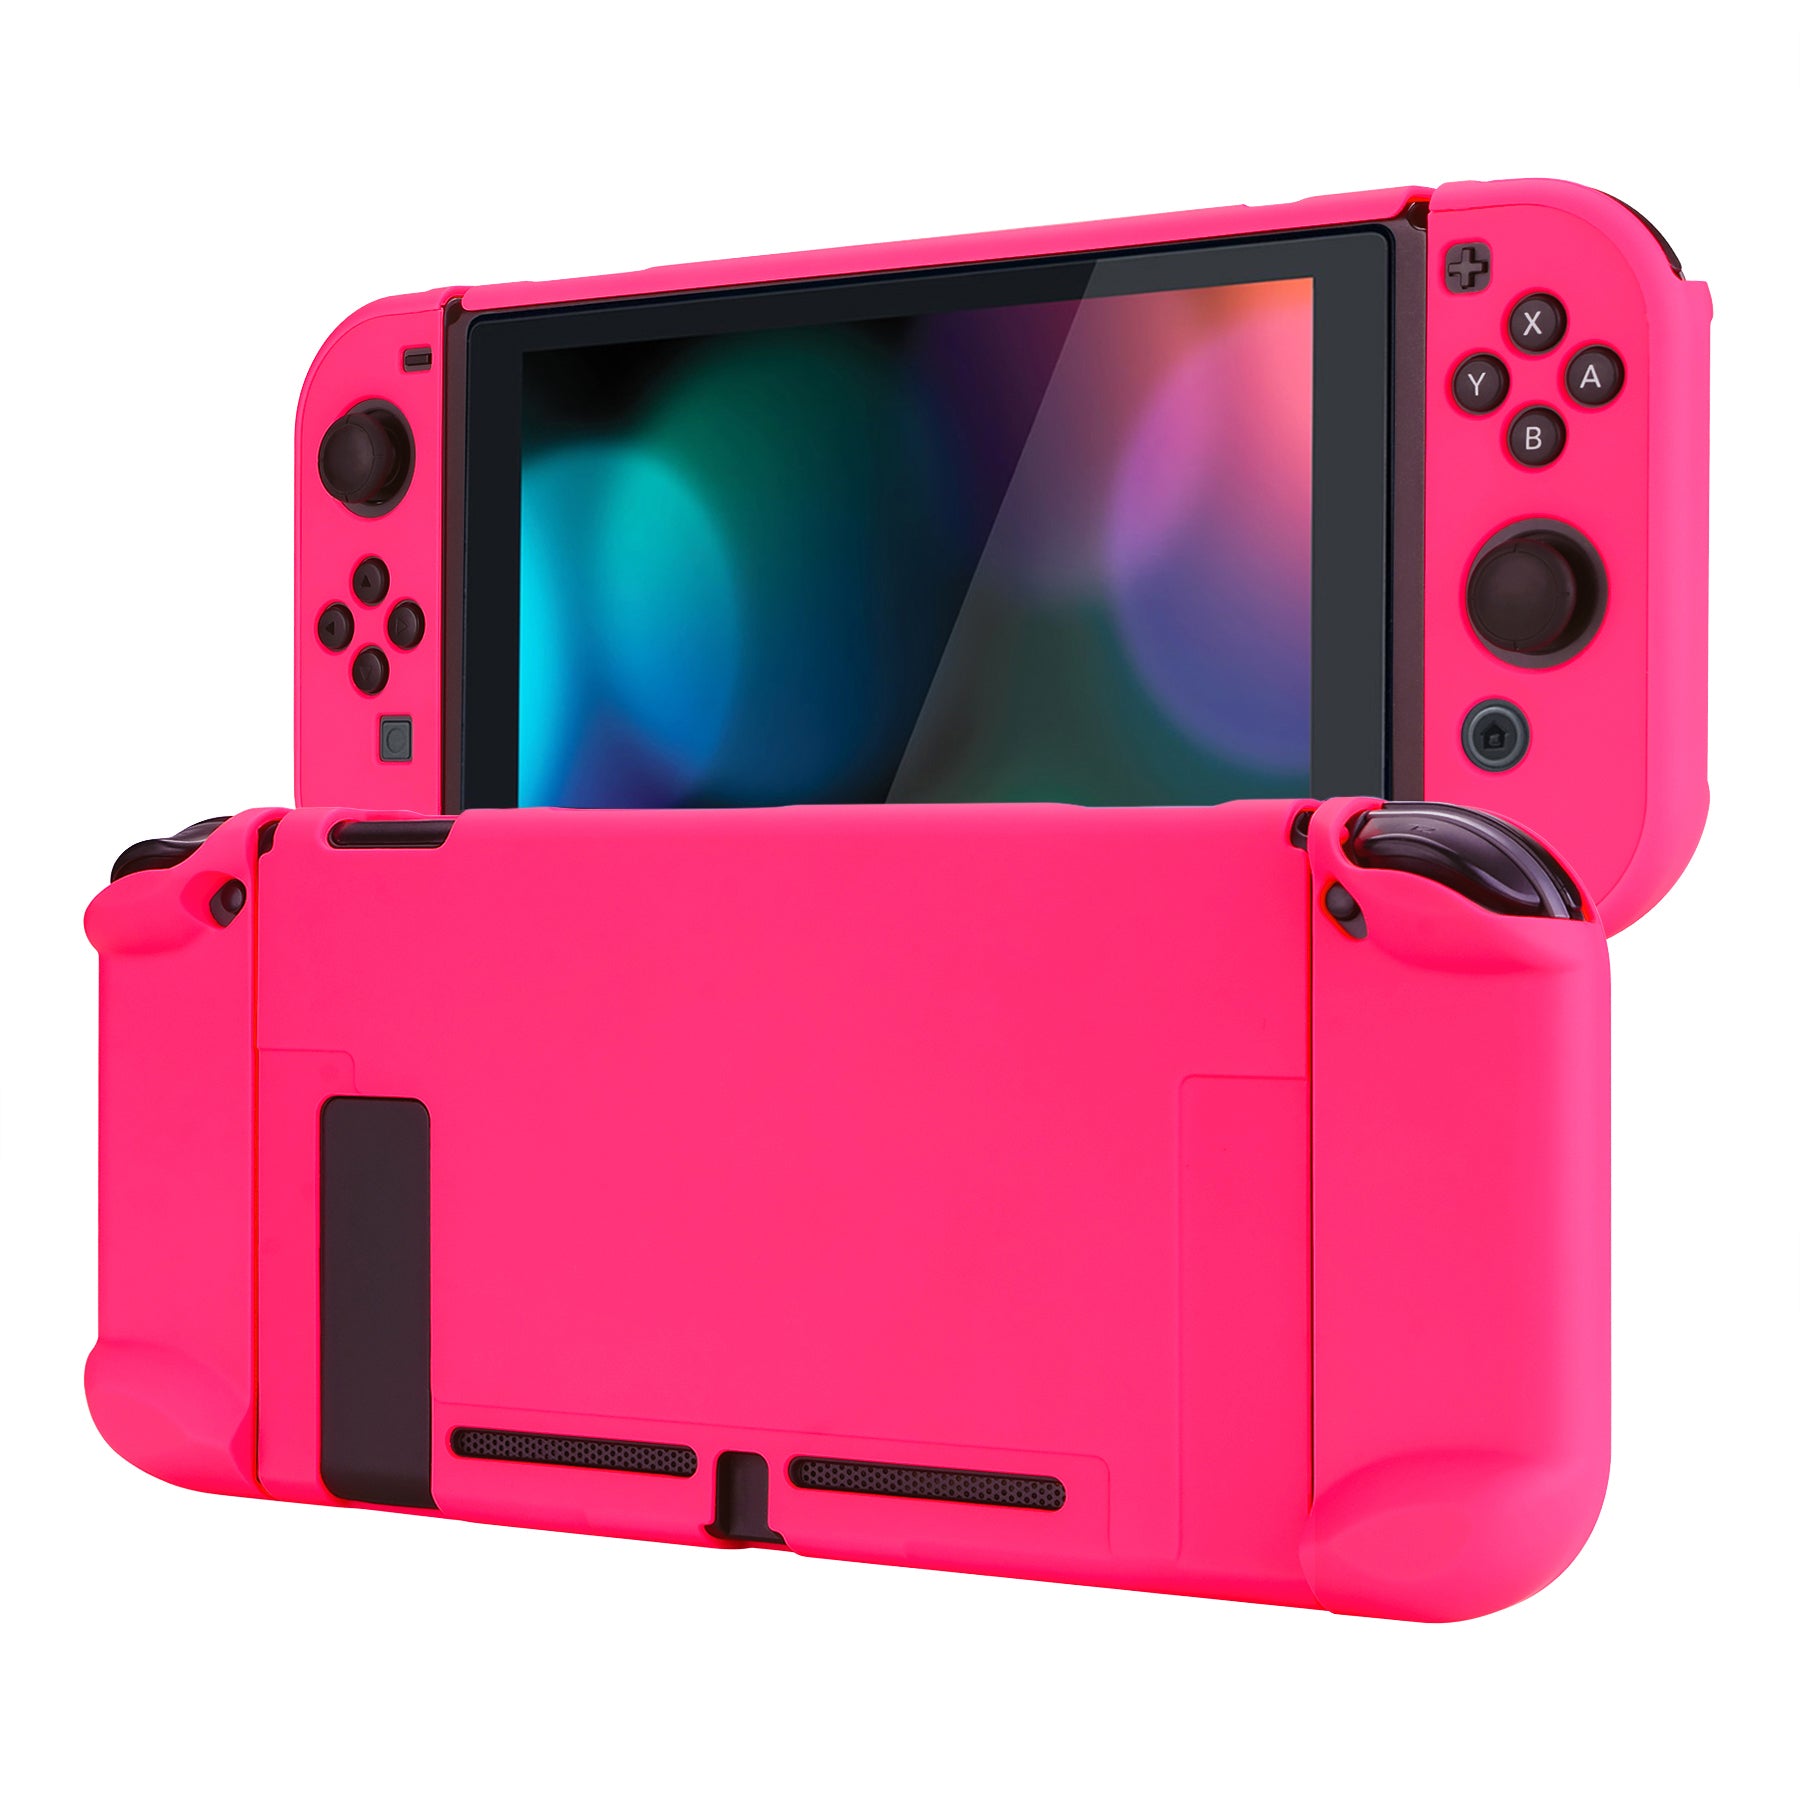 PlayVital Bright Pink Back Cover for Nintendo Switch Console, NS